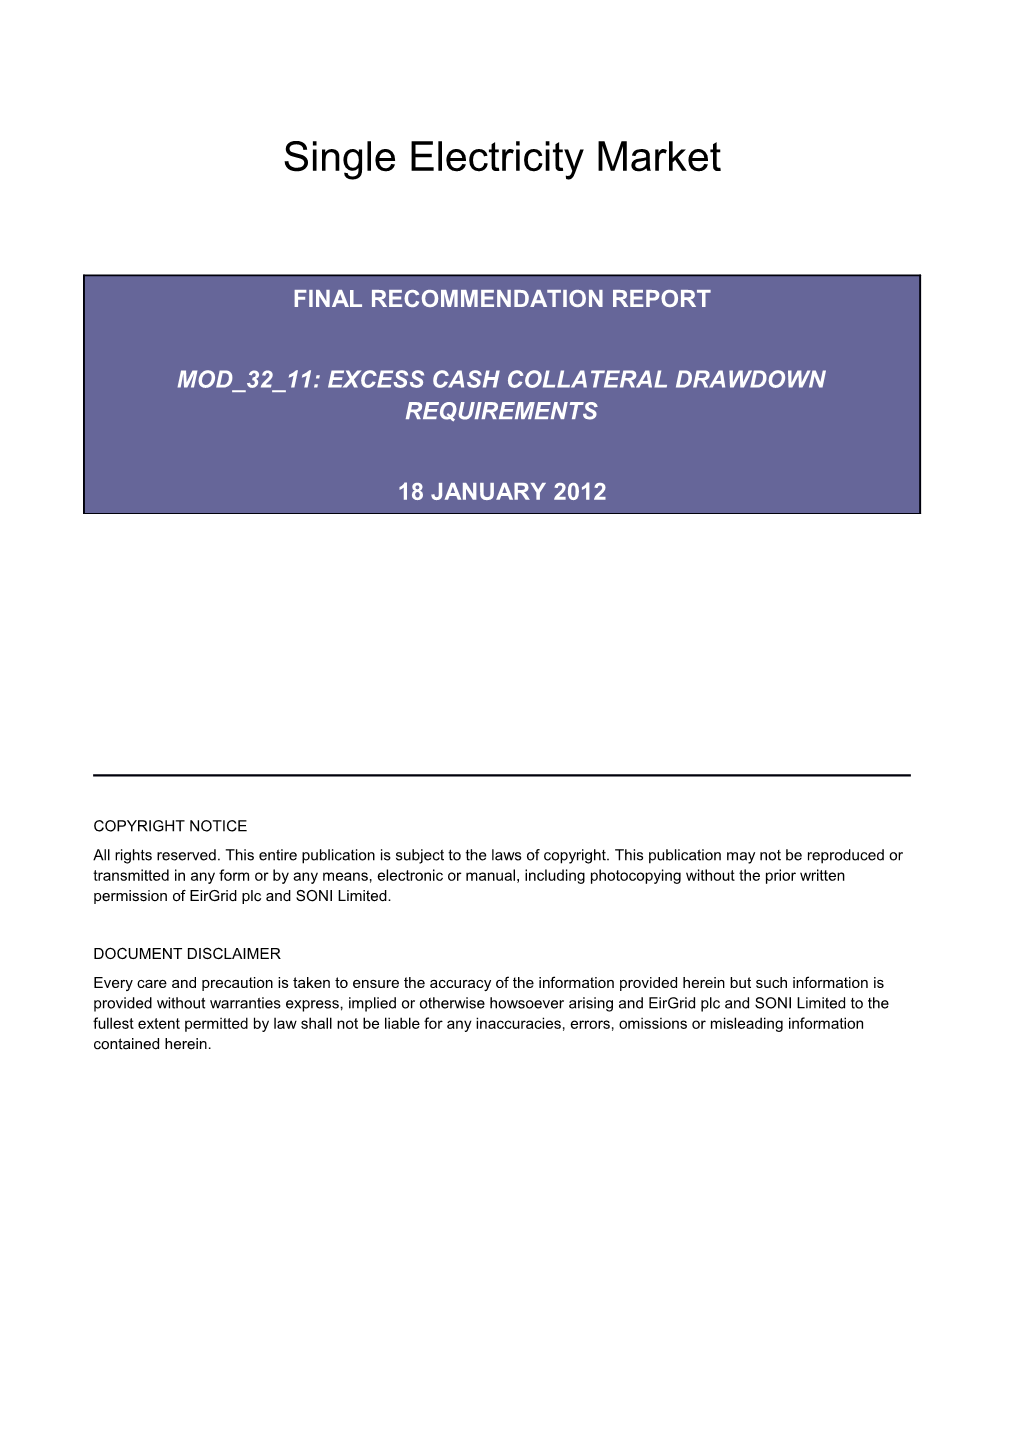 Final Recommendation Reportmod 32 11 Excess Cash Collateral Drawdown Requirements